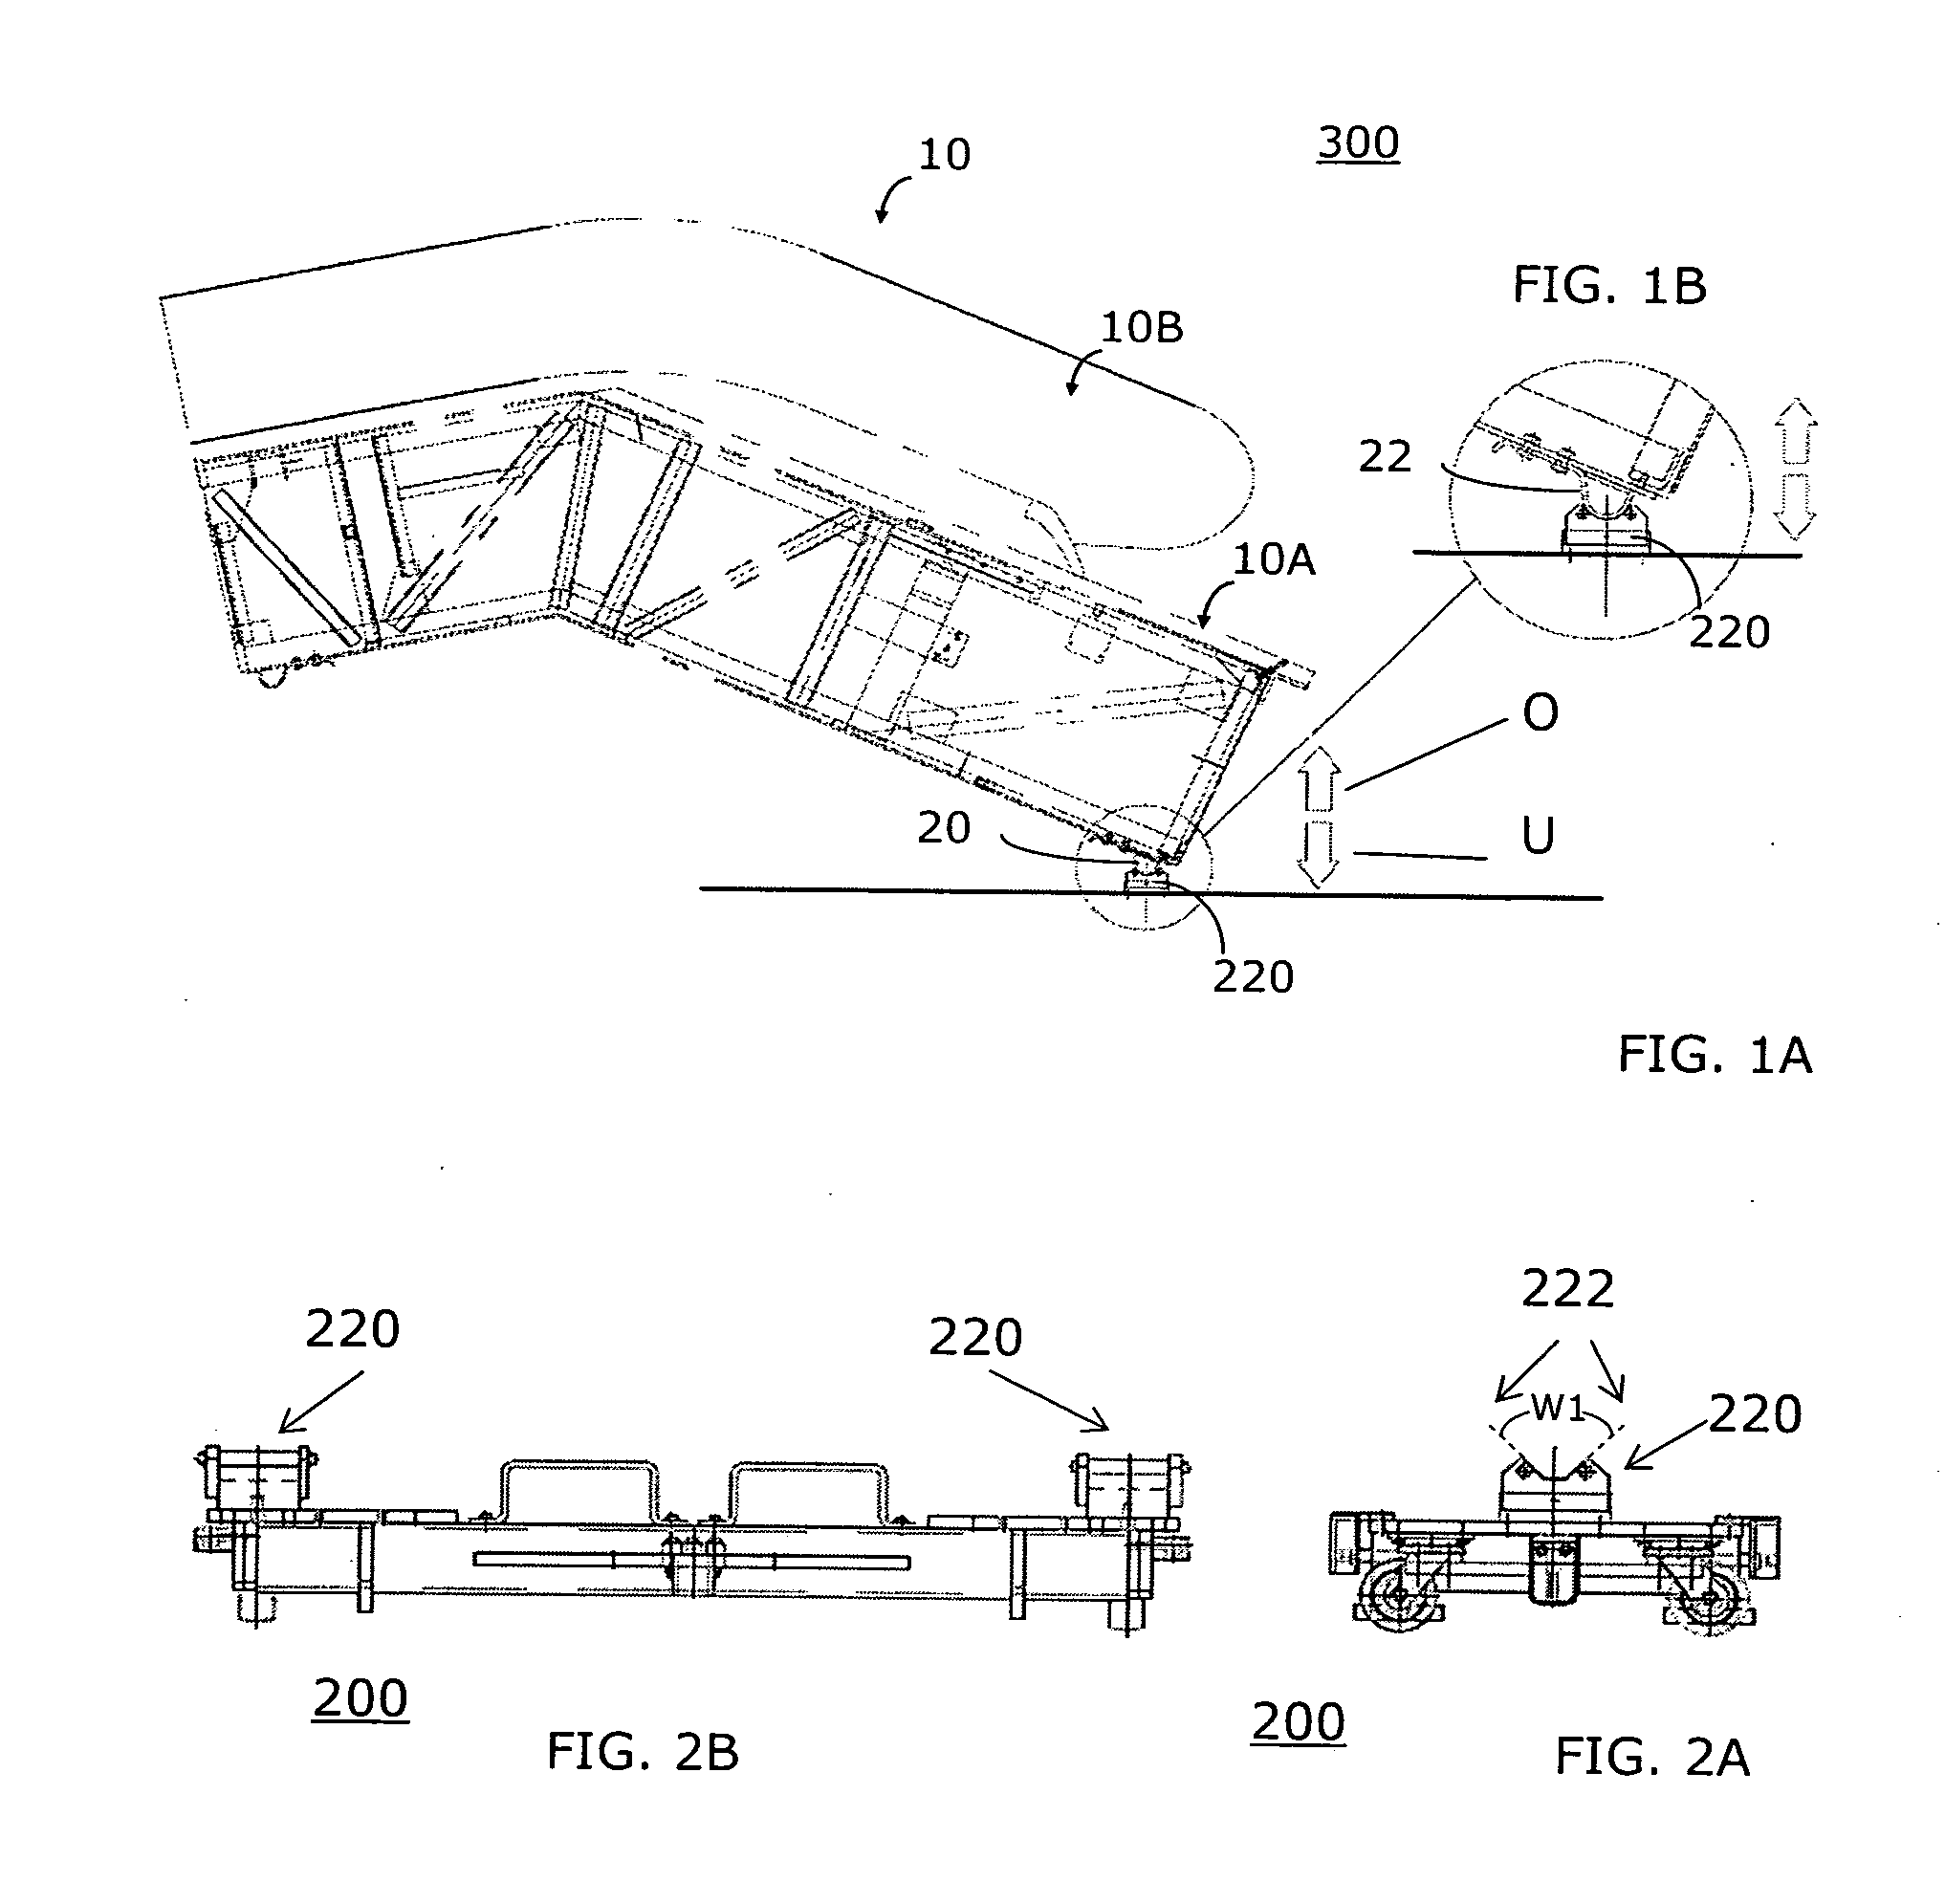 Lifting system, transportation system cradle, intermediate product with transportation system cradle and transportation system structure, assembly plant and assembly method for manufacturing assembly of intermediate products